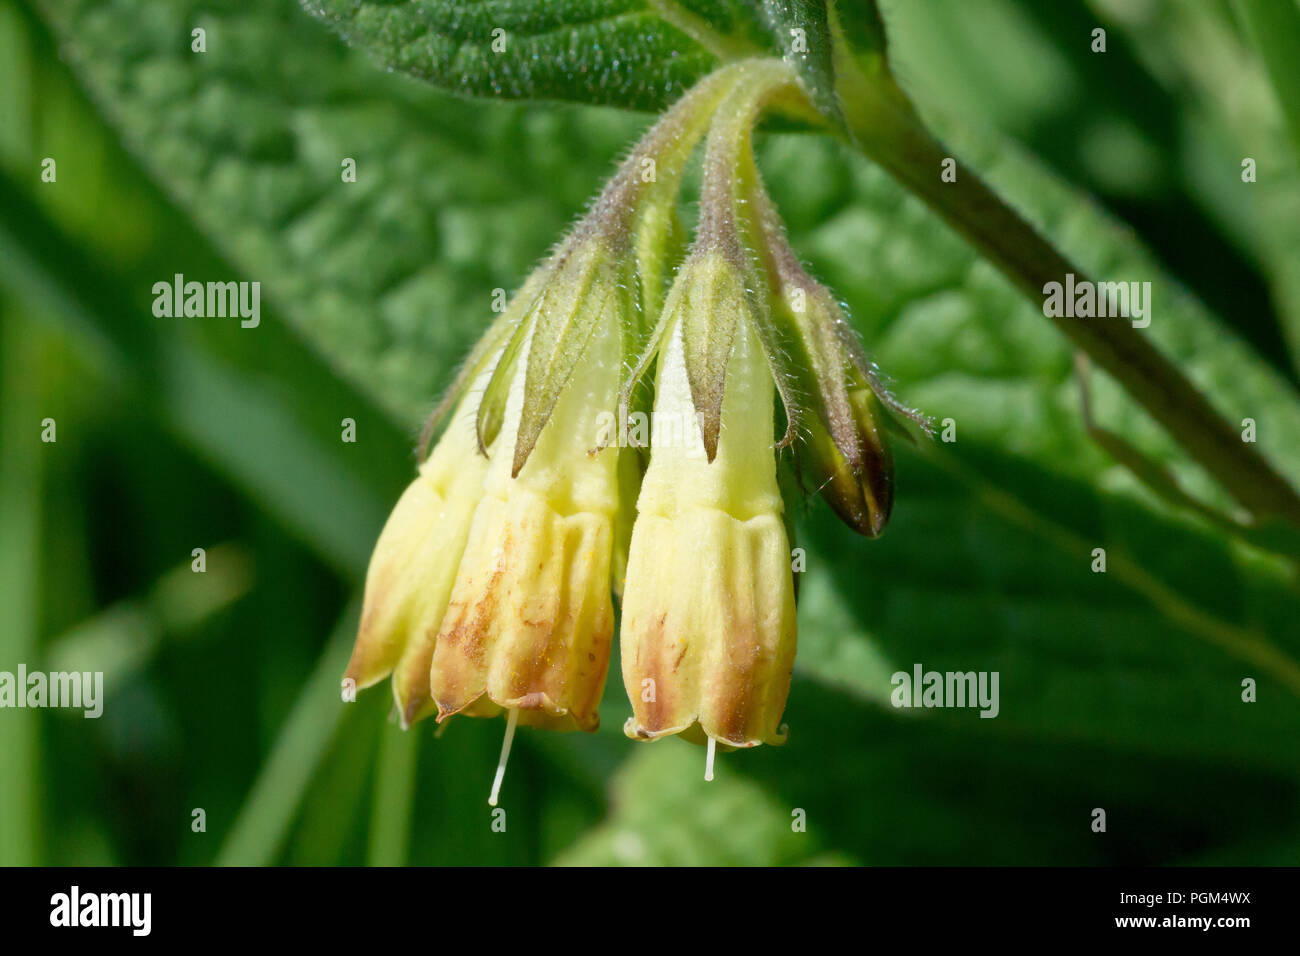 Comfrey, most likely Tuberous Comfrey (symphytum tuberosum), close up of the drooping flowers. Stock Photo